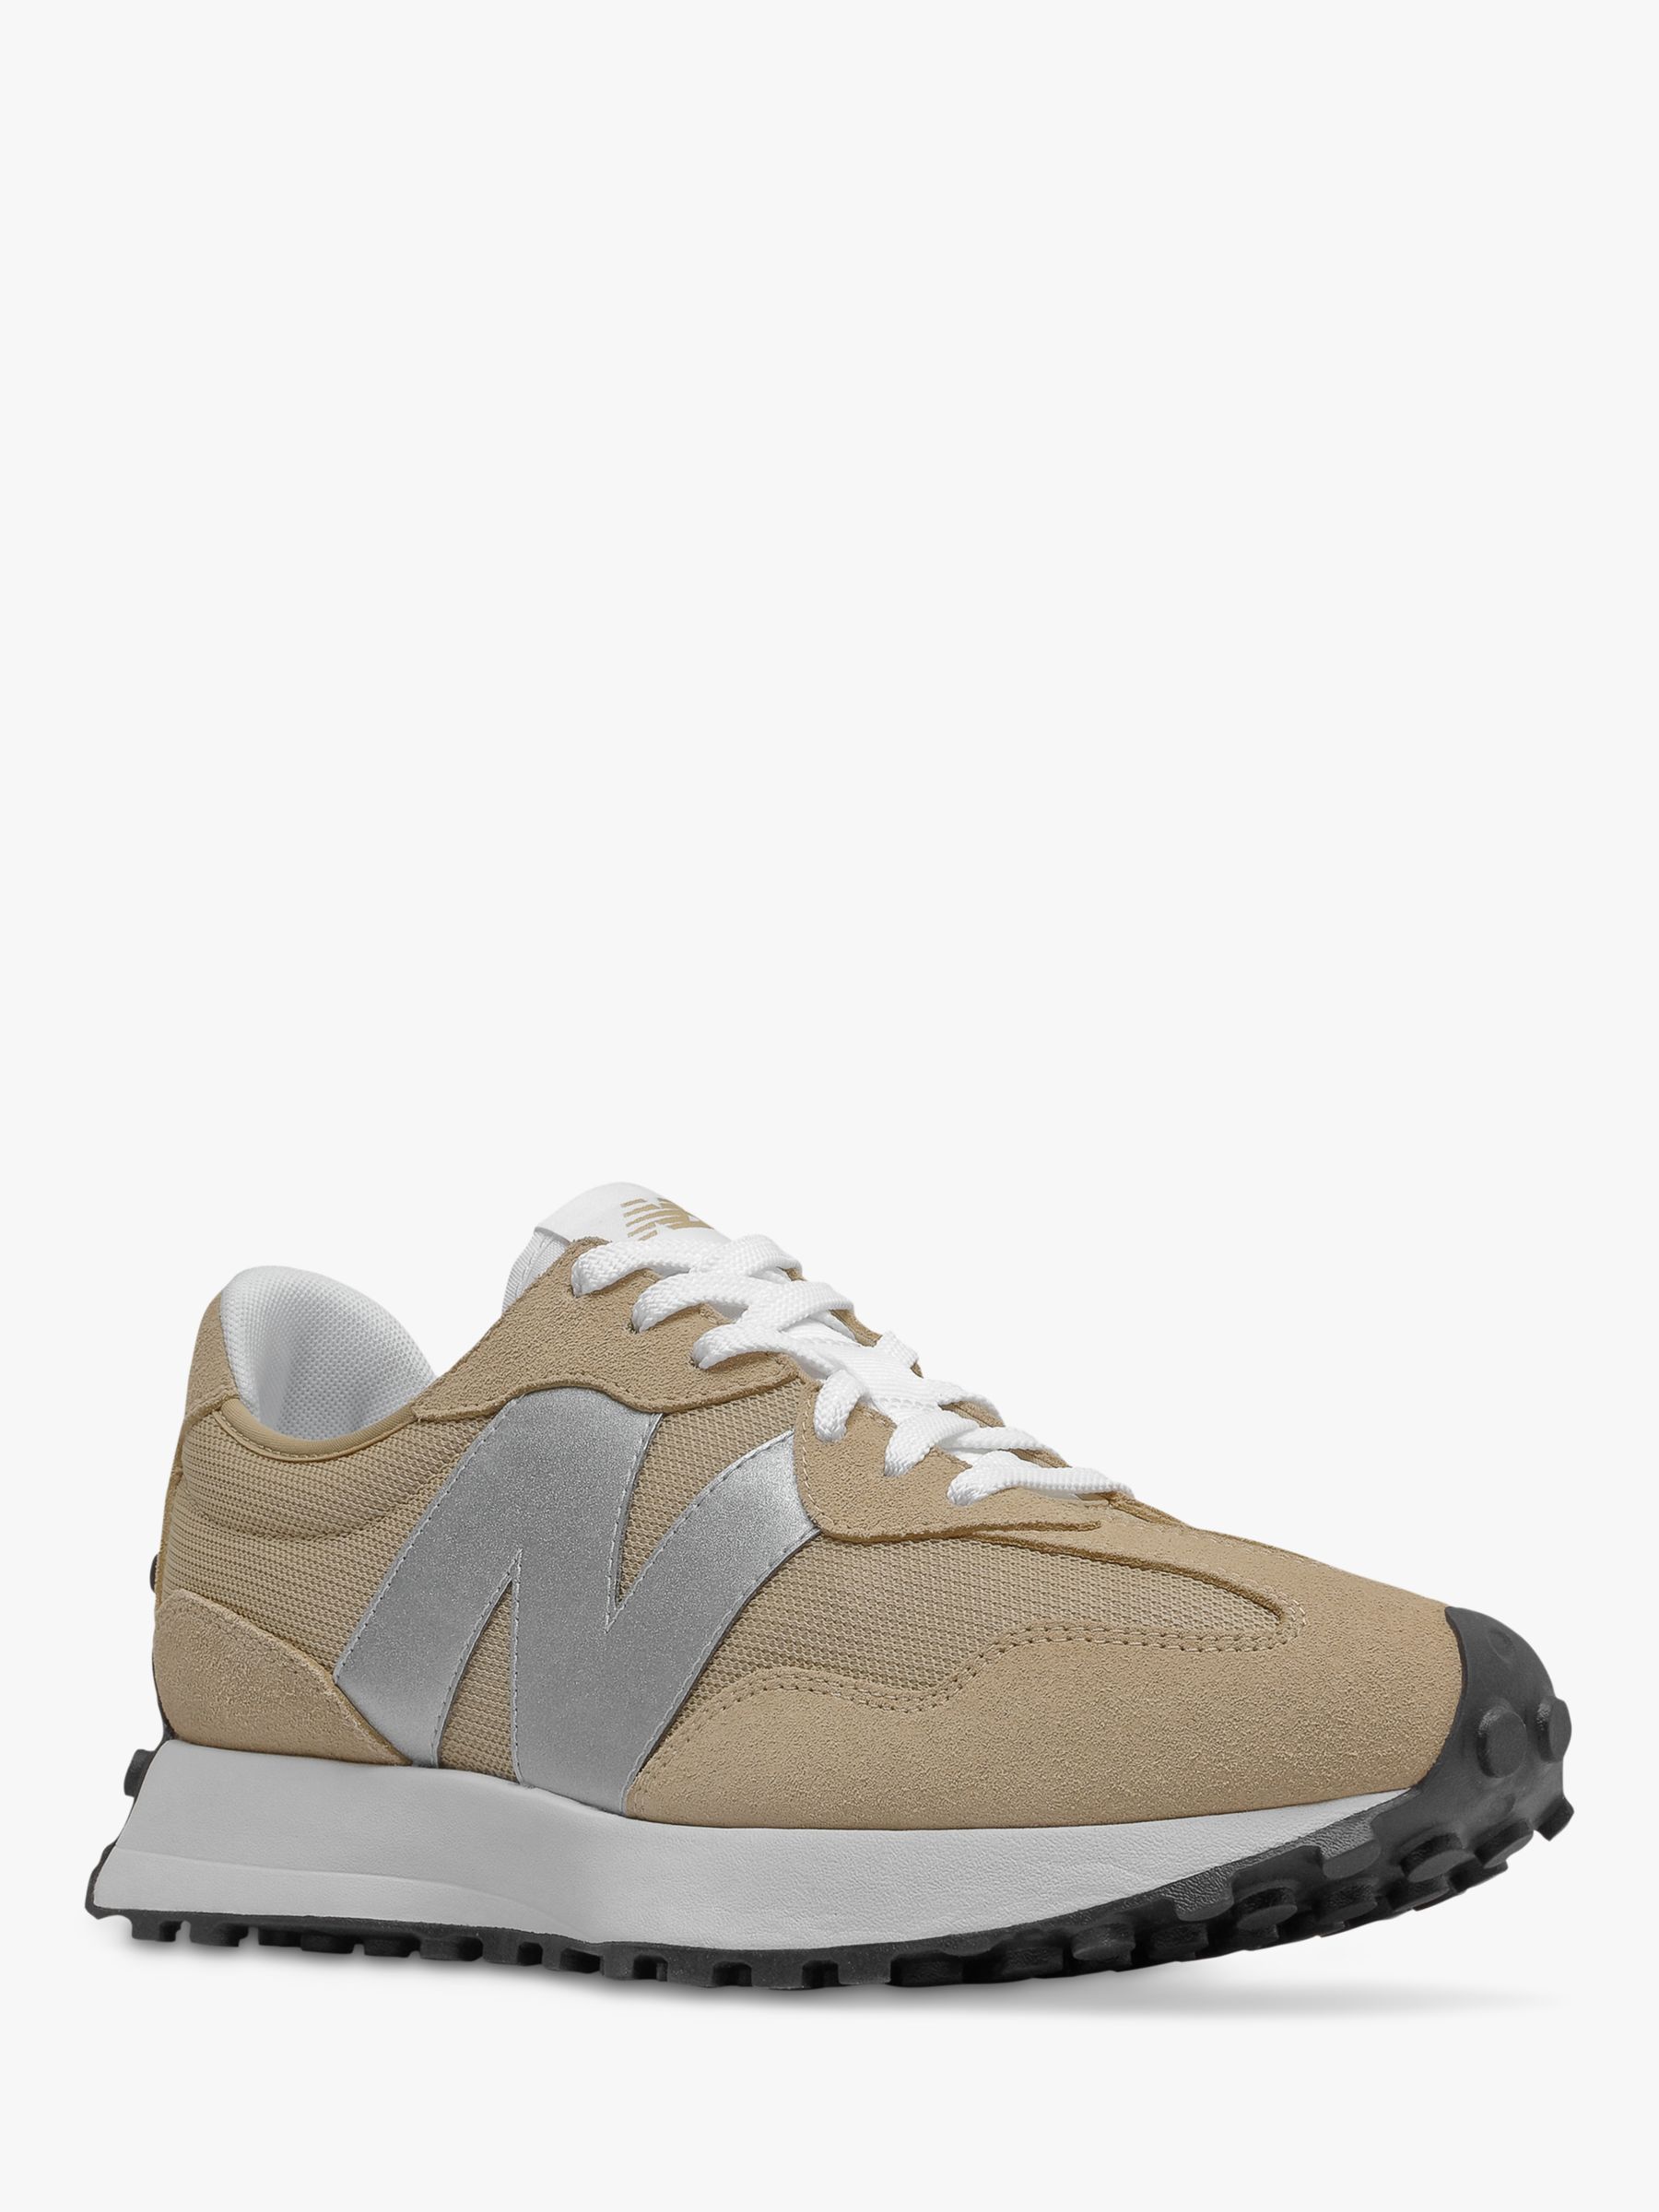 New Balance 327 Suede Trainers, Incense at John Lewis & Partners